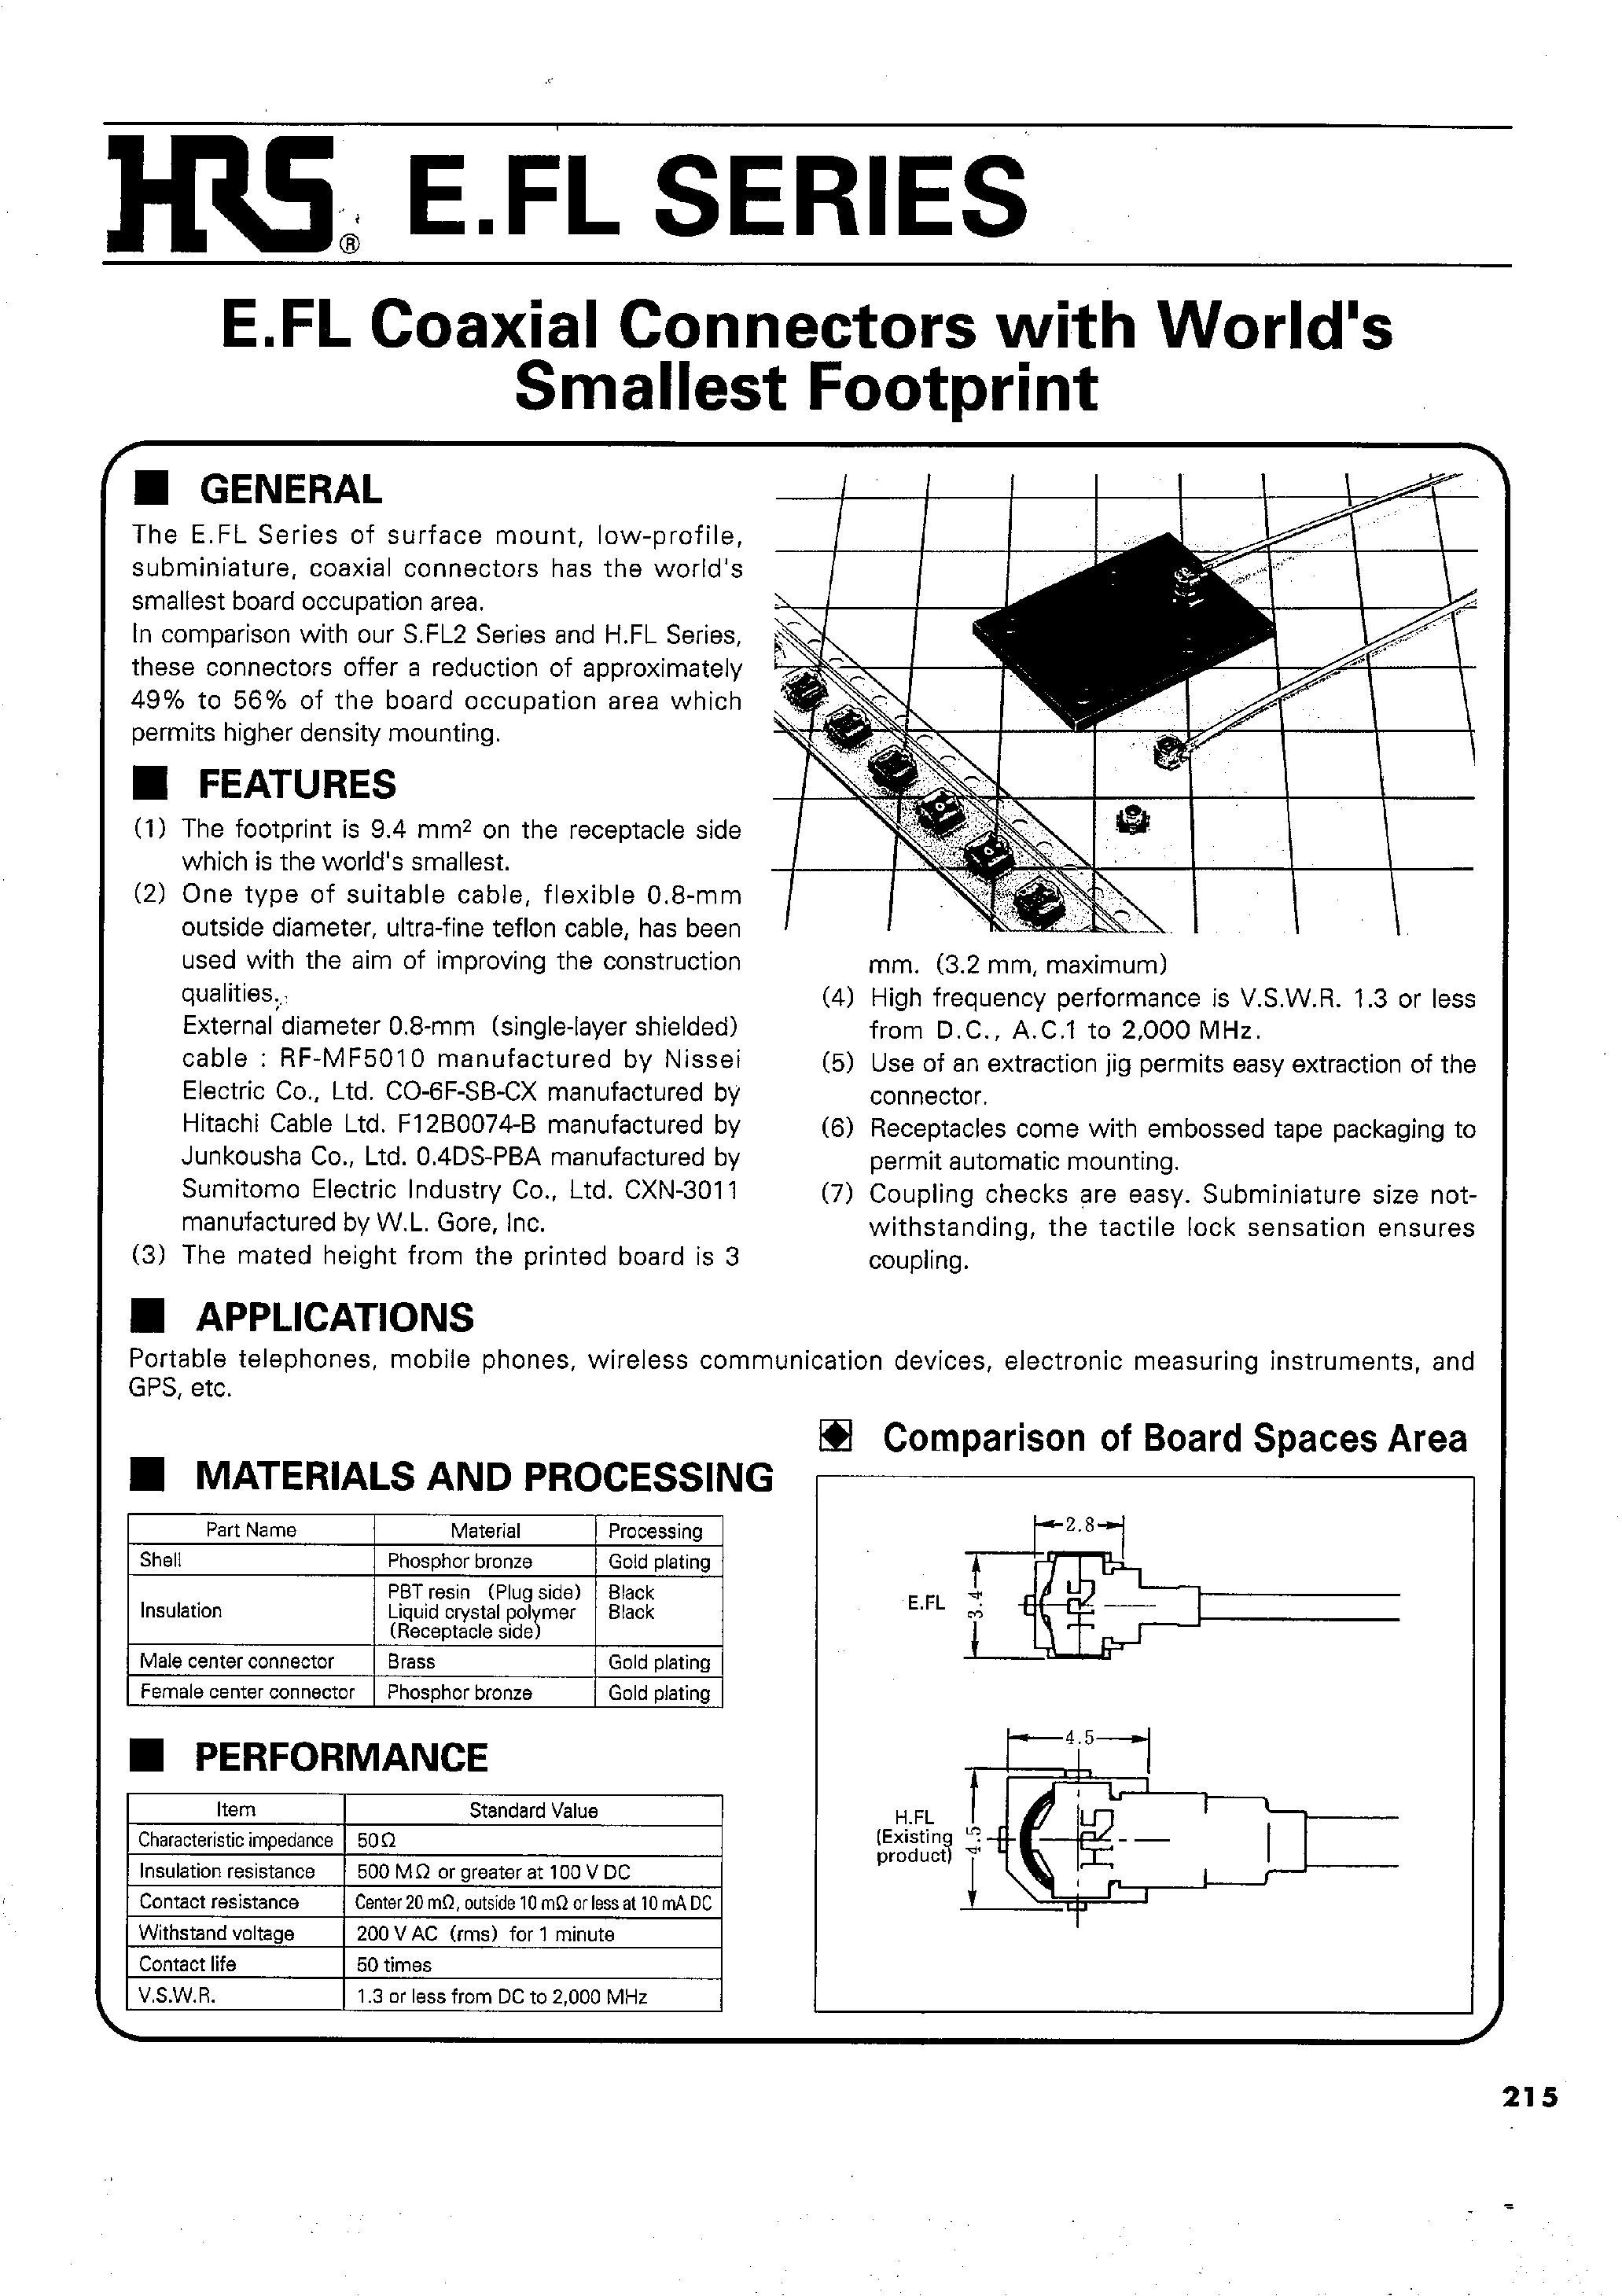 Datasheet E.FL-LP-066 - E.FL Coaxial Connectors with World Smallest Footprint page 1